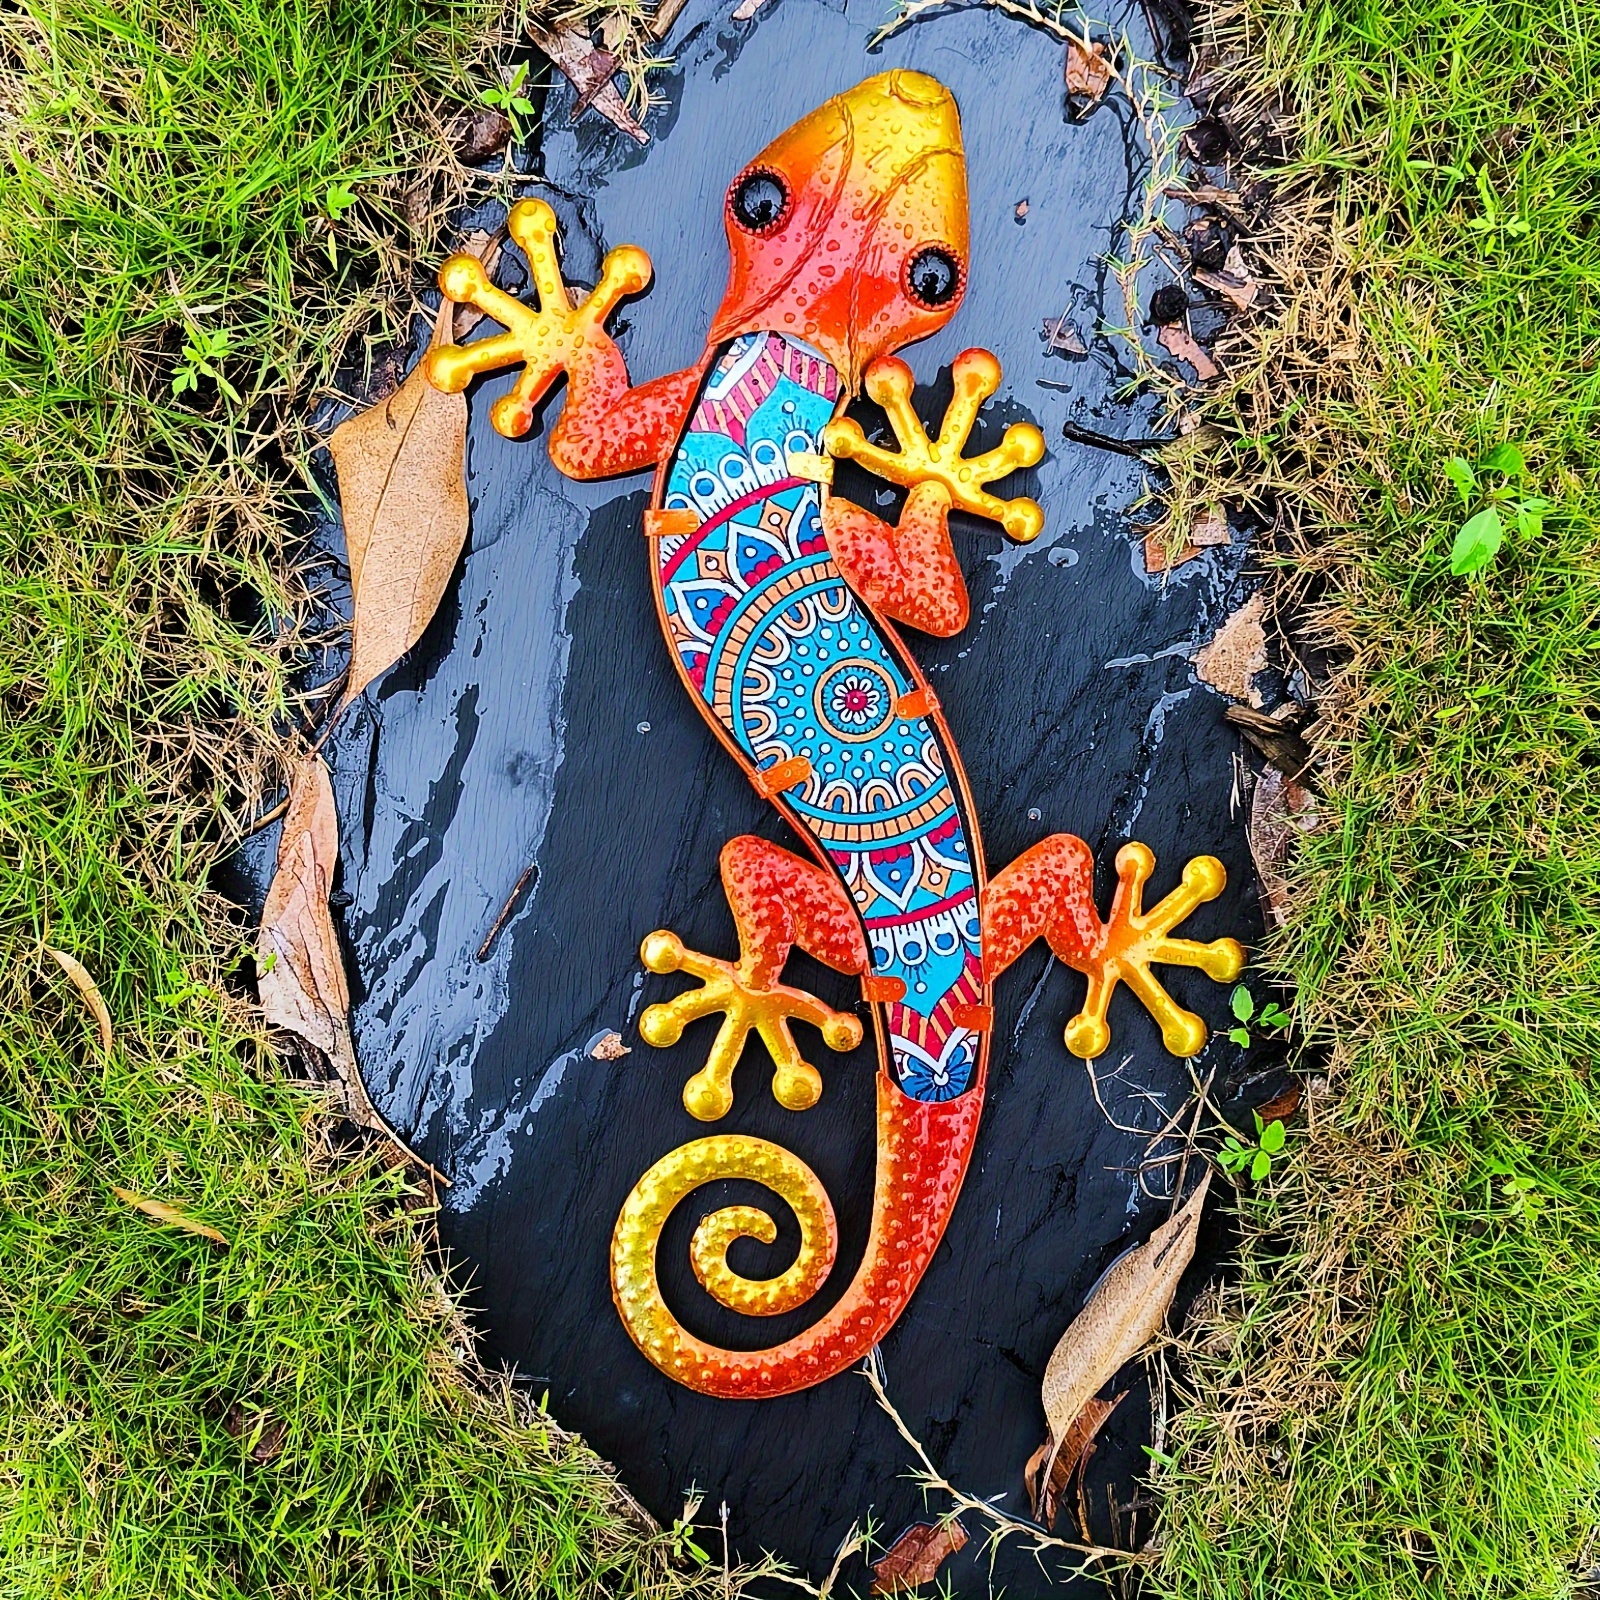 

Art Deco Metal Lizard Wall Art Statue - Outdoor Indoor Garden Wall Hanging Sculpture, Animal Theme, Easter Occasion, No Battery Required, Reptile Statue Type For Patio Bedroom Living Room Fence Decor